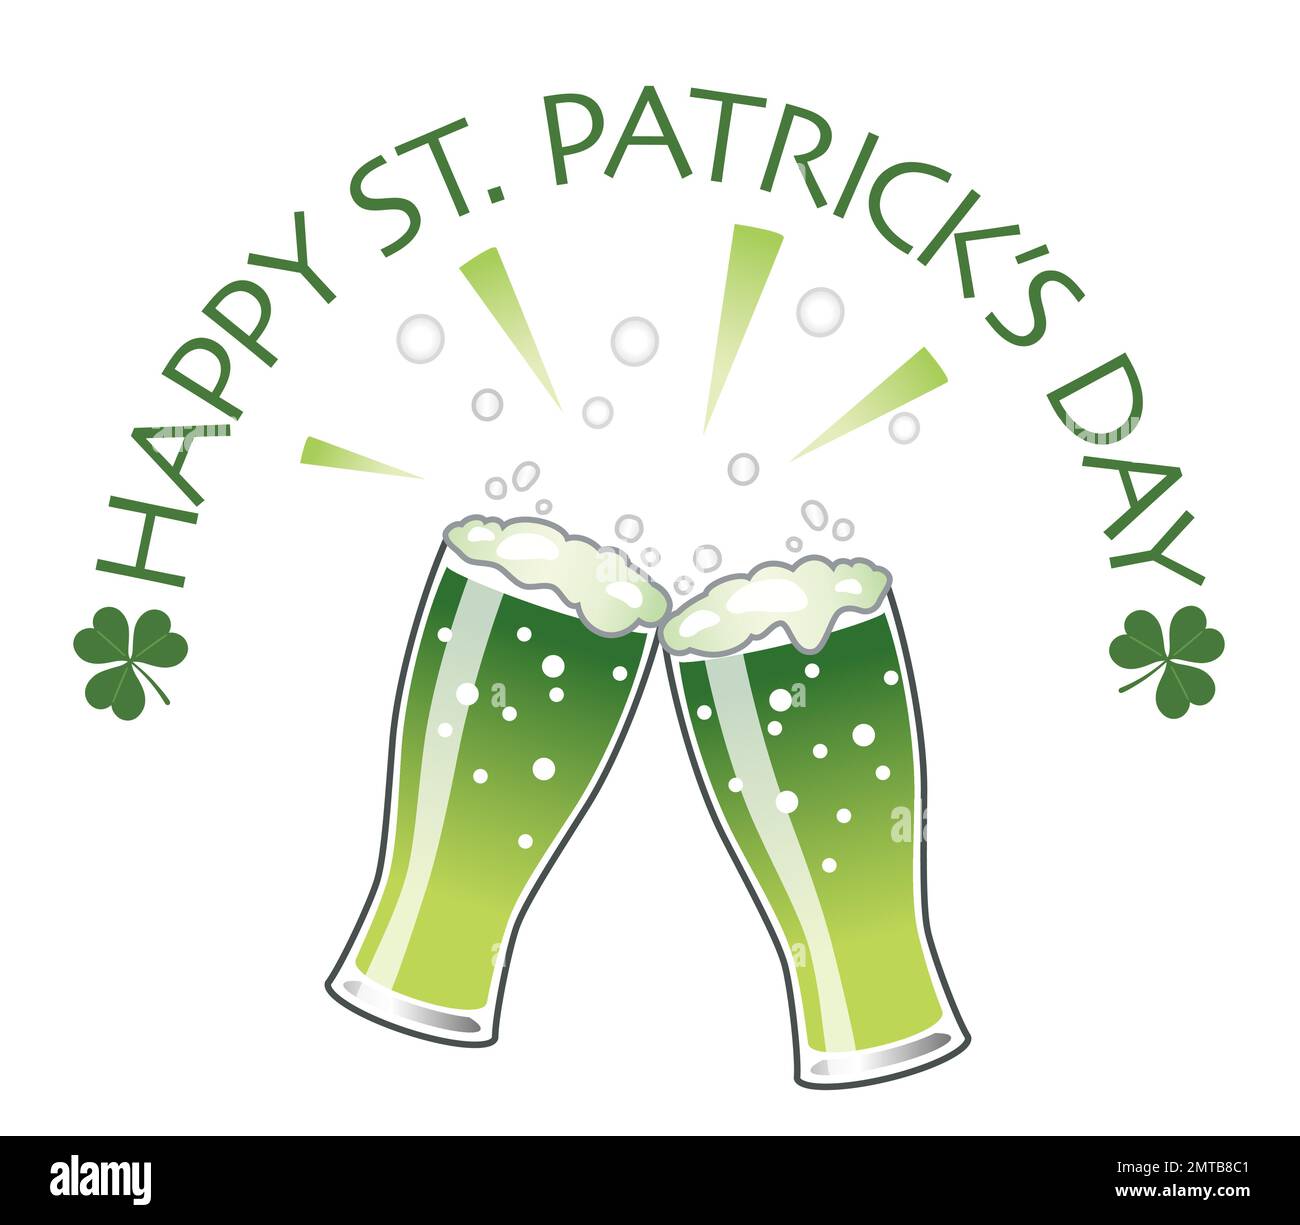 Vector St. Patrick’s Day Green Beer Glasses Illustration Isolated On A White Background. Stock Vector